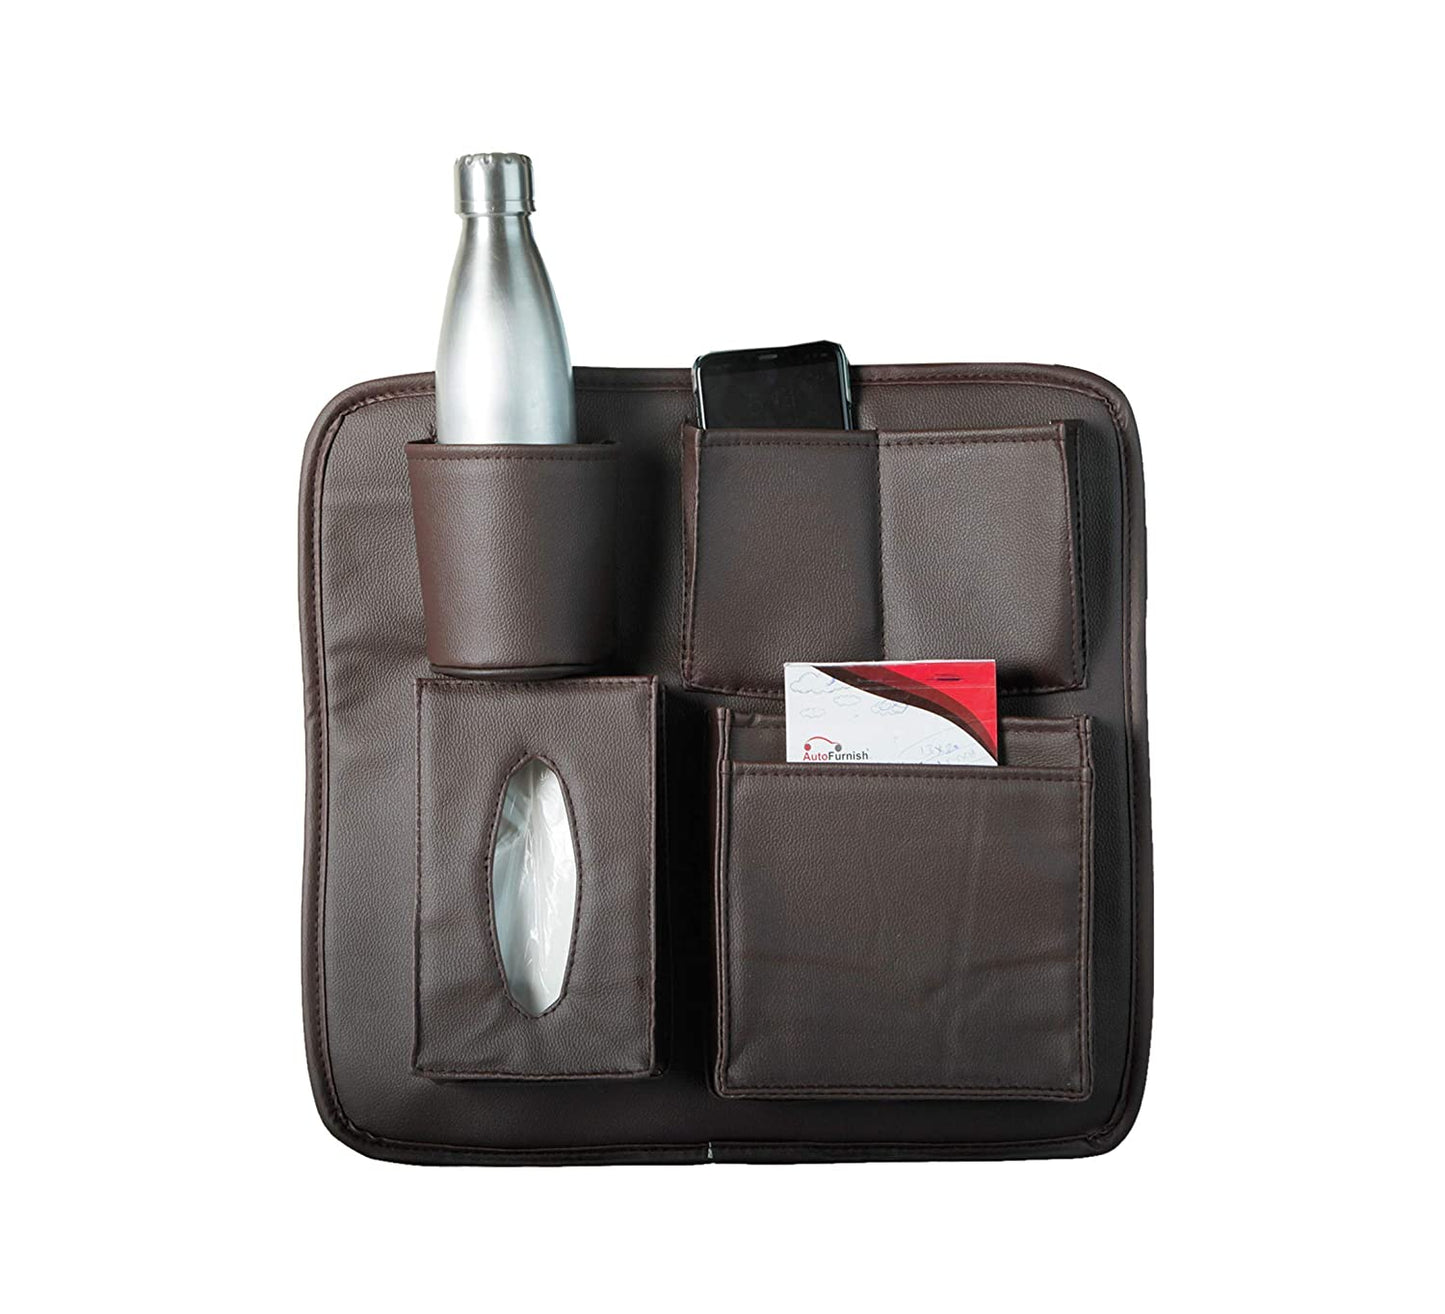 COMPACT Car Seat Organizer | PU Leather with 6 Pockets - Tissues, Bottles, Phone, iPad Mini, Documents